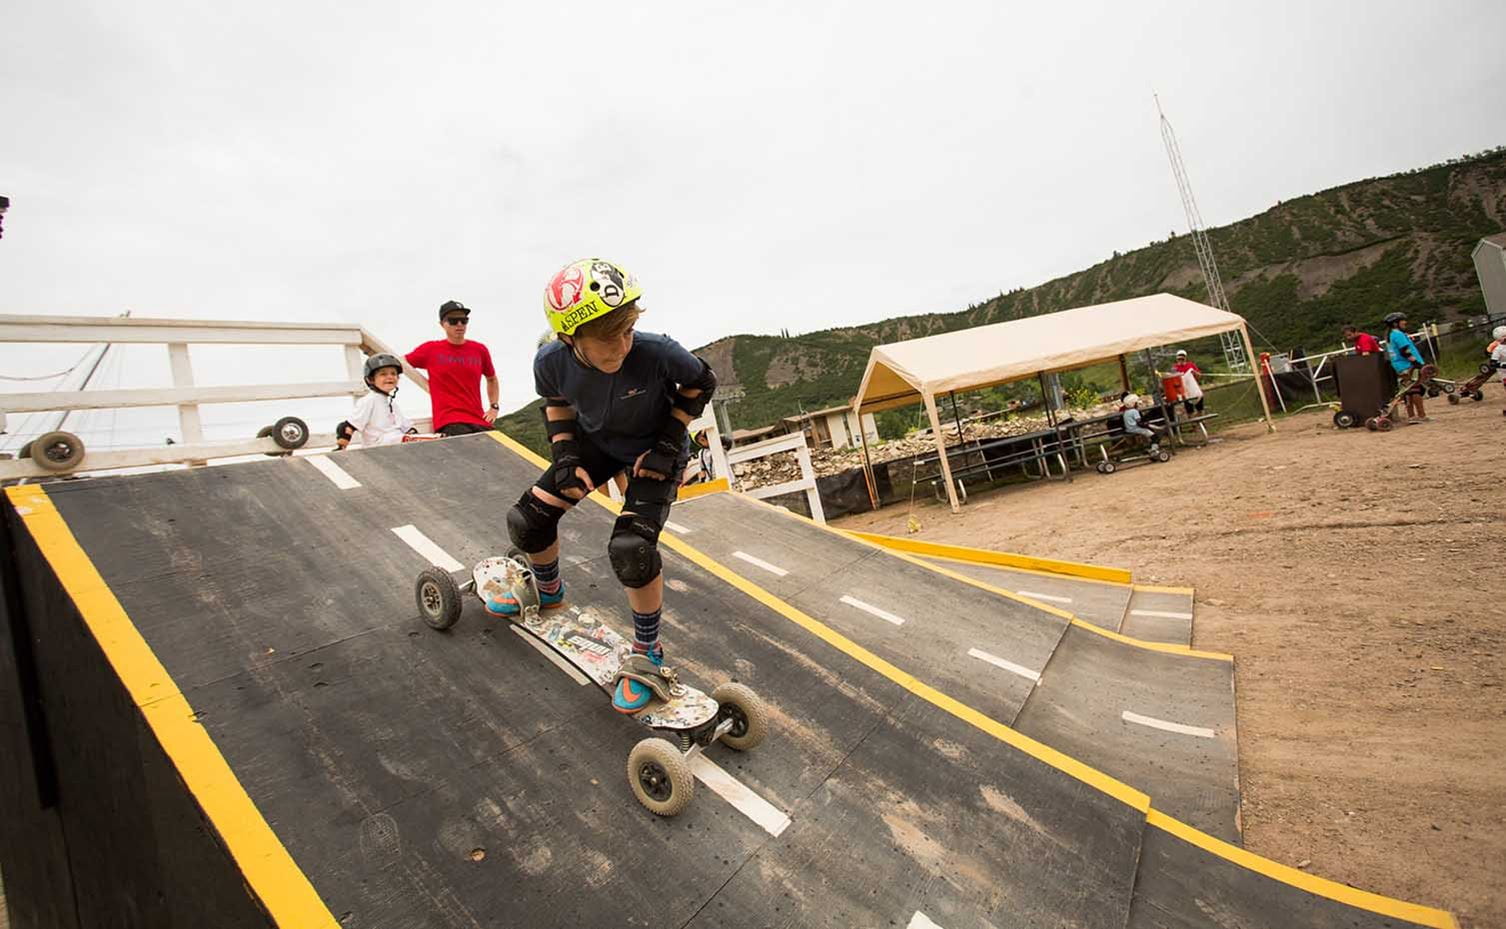 Private Camp Mountainboarding